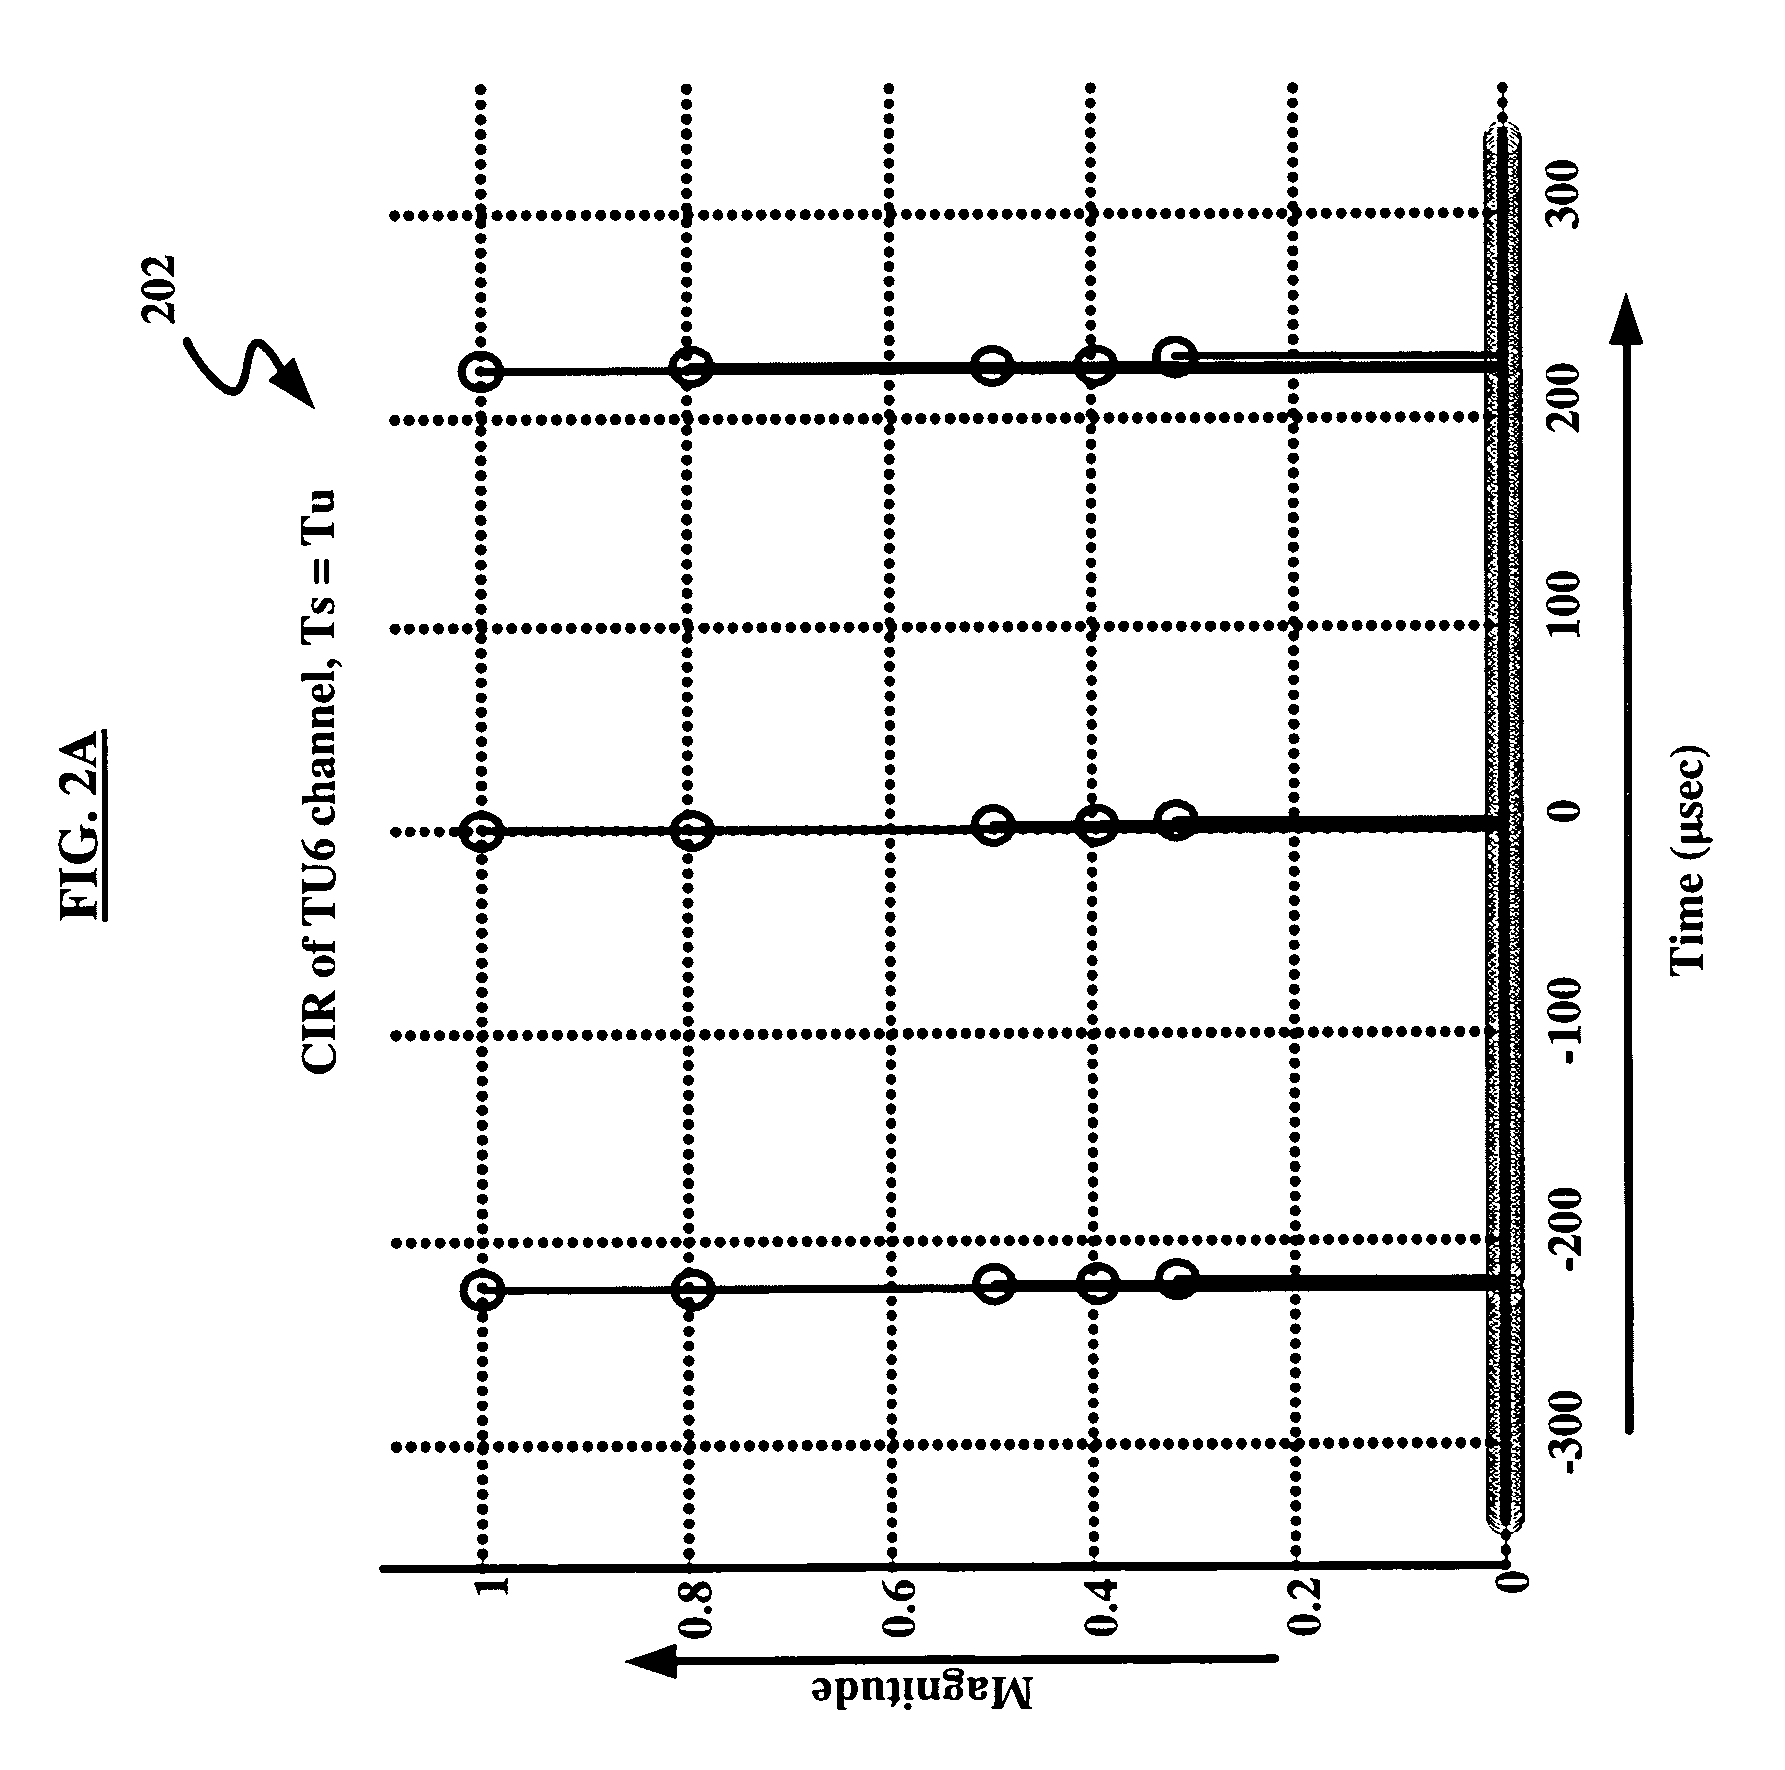 Adaptive frequency domain equalization in OFDM based communication system